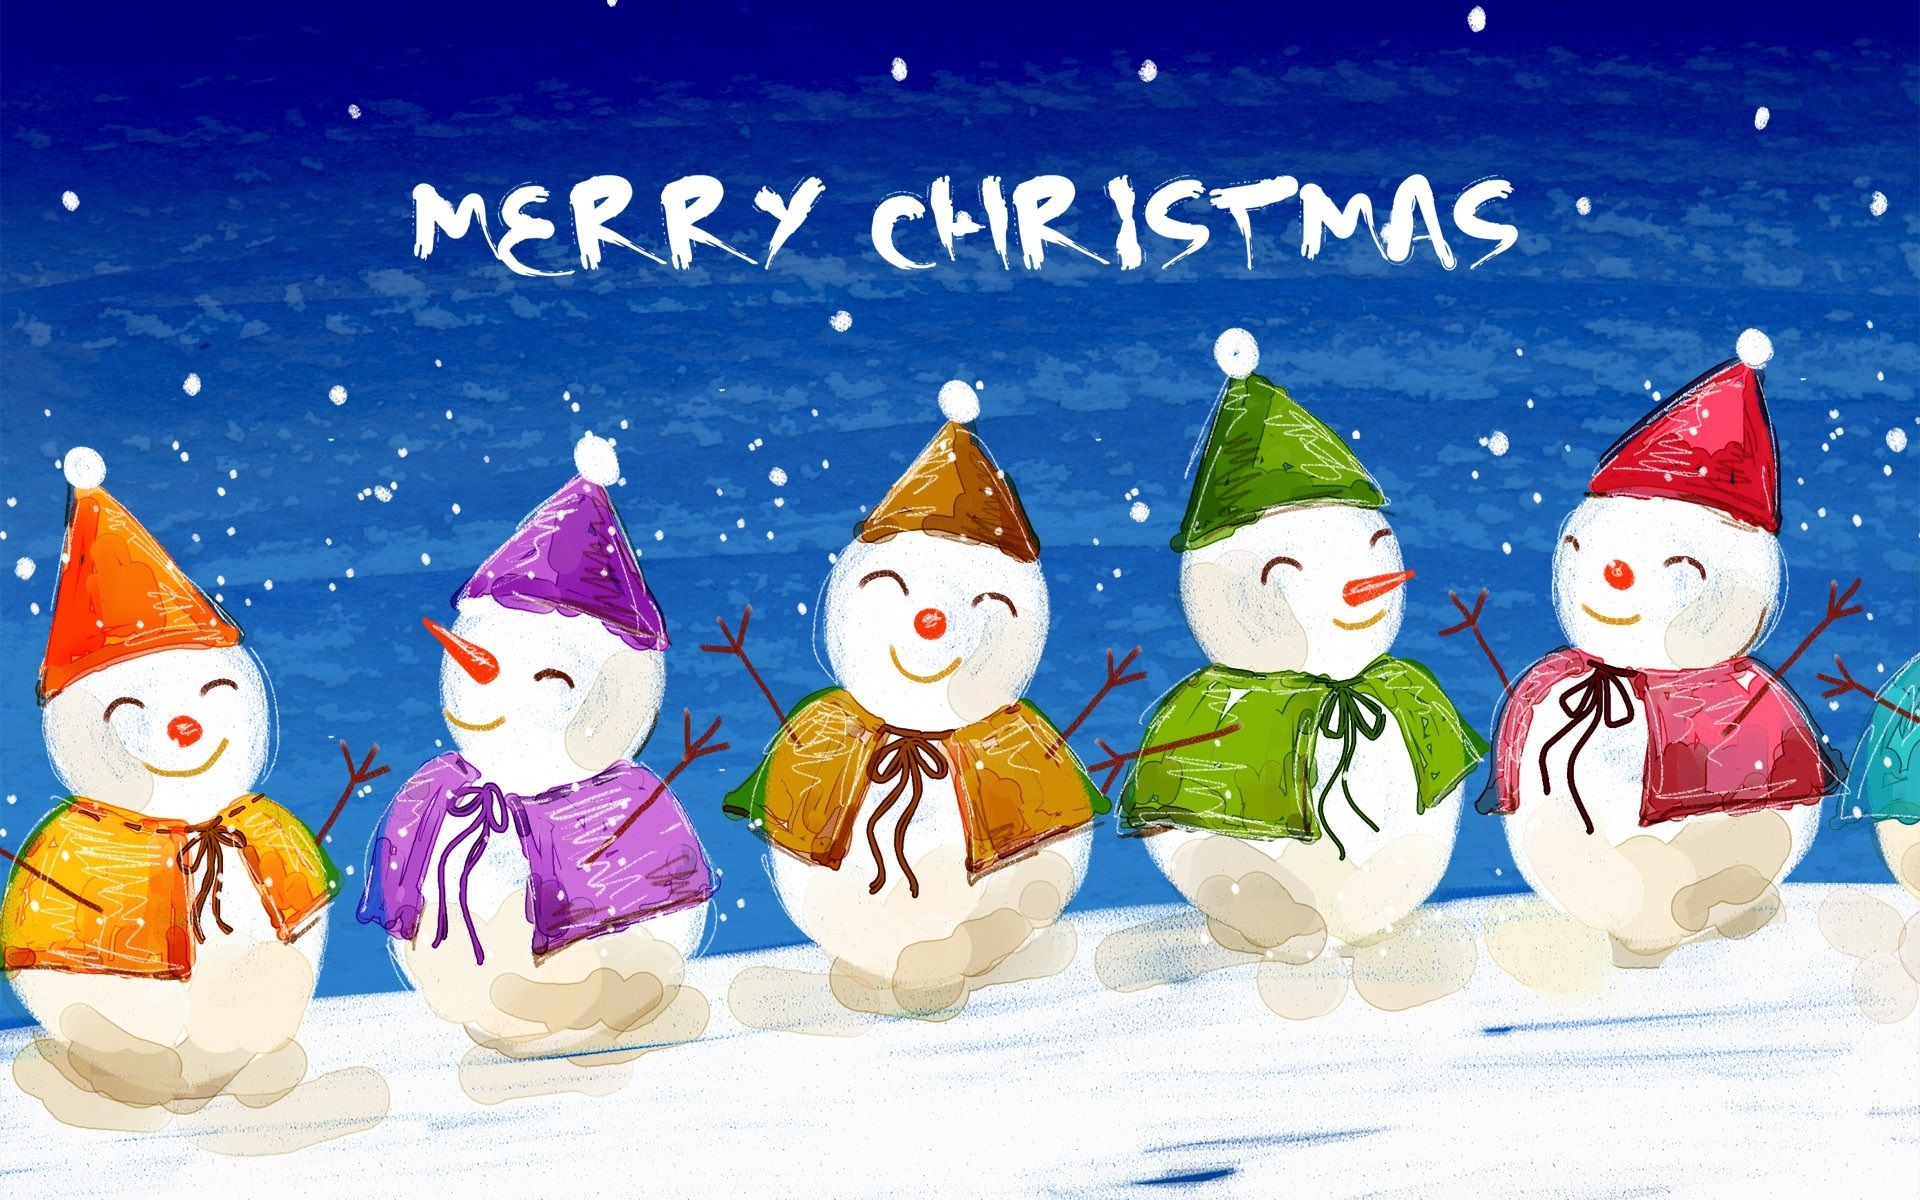 Animated Merry Christmas Wallpaper Image Picture Santa Claus Funny Animation On Xmas3